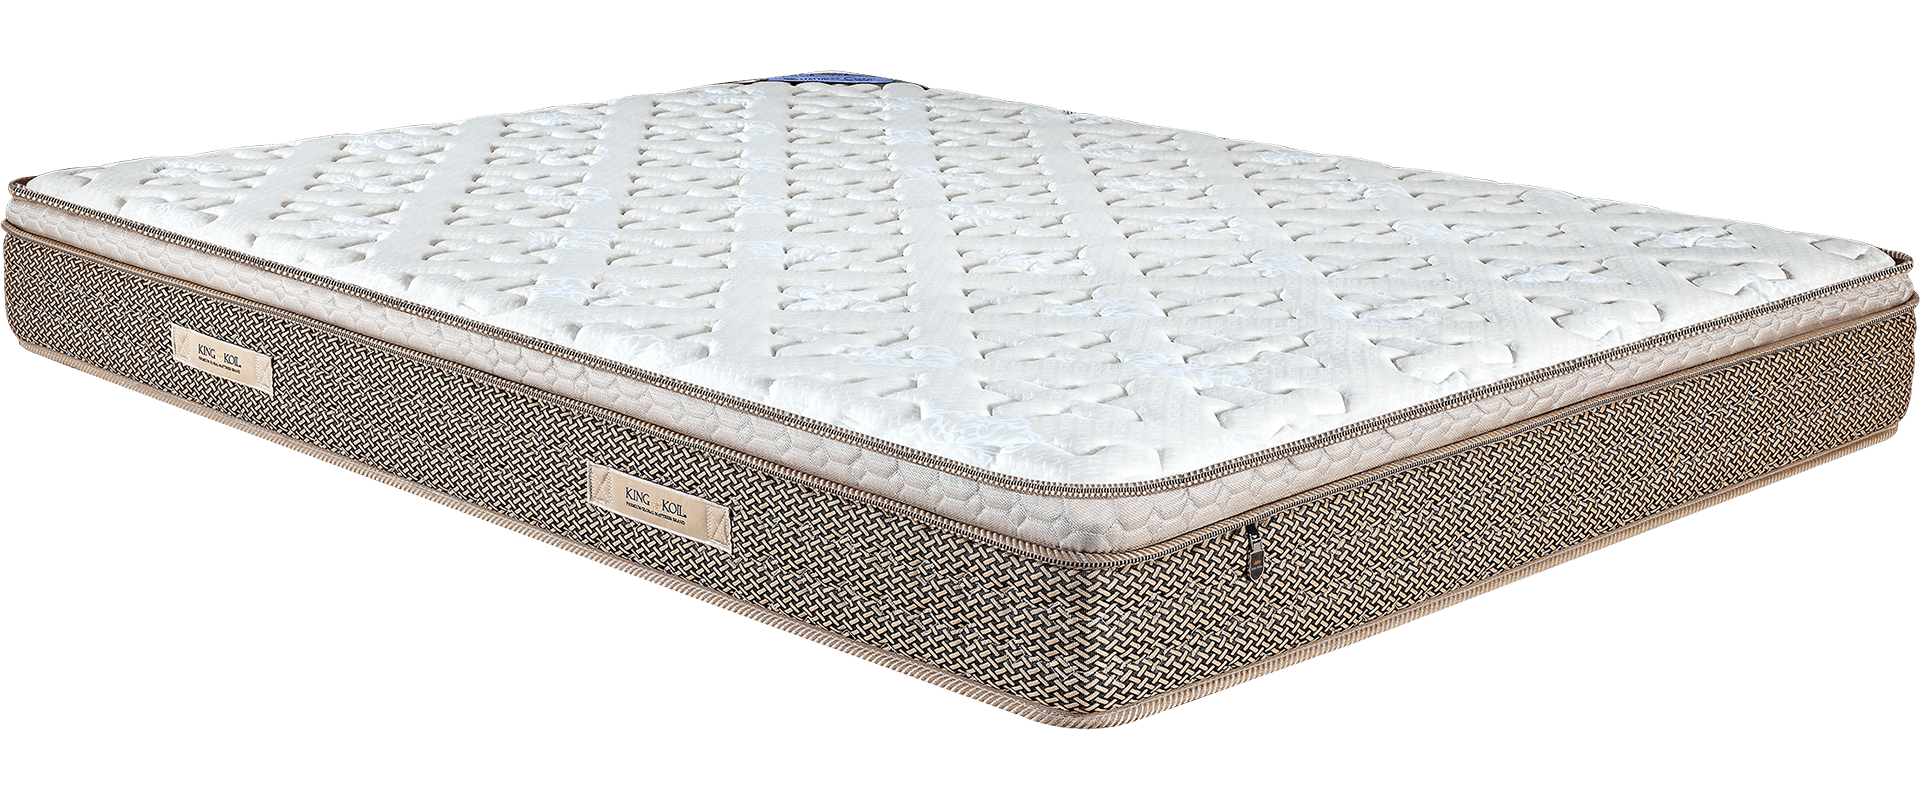 dr ortho mattress 4 inch price